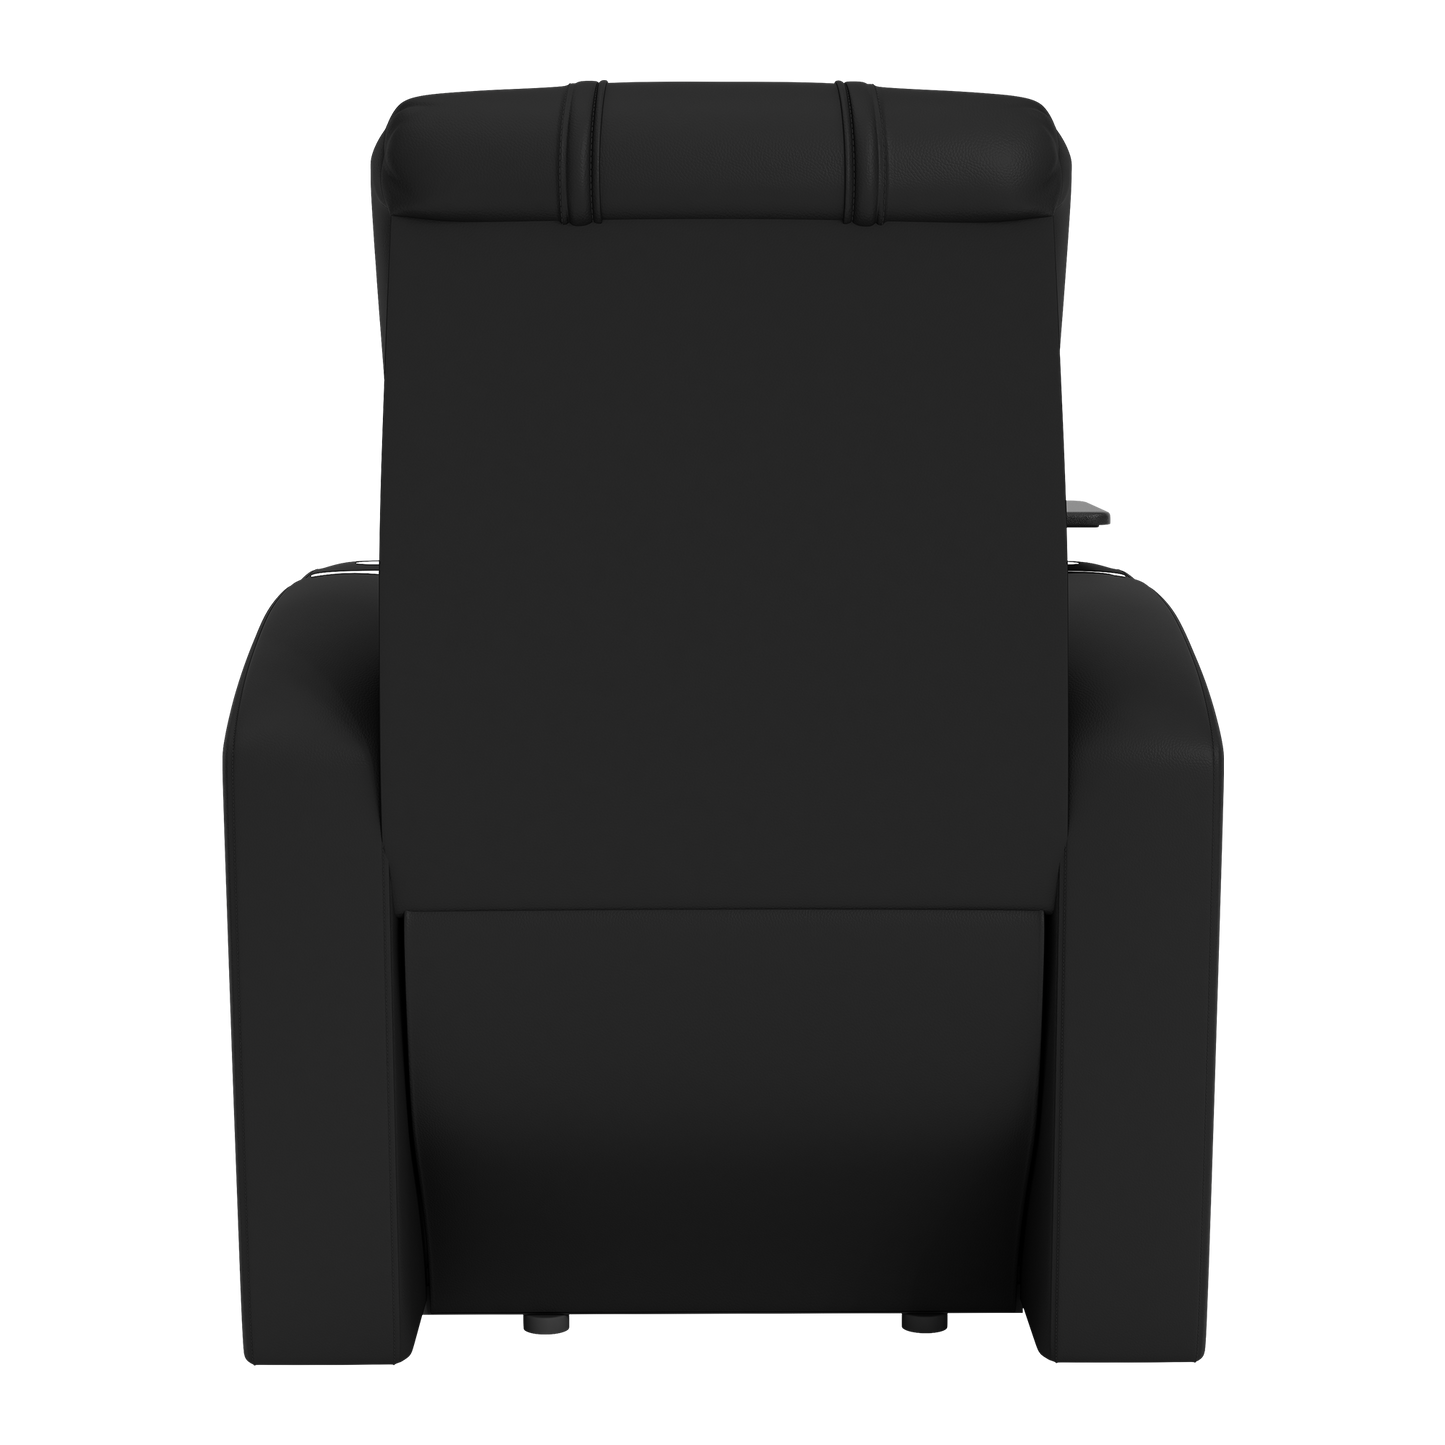 Stealth Power Plus Recliner with Vanderbilt Commodores Secondary